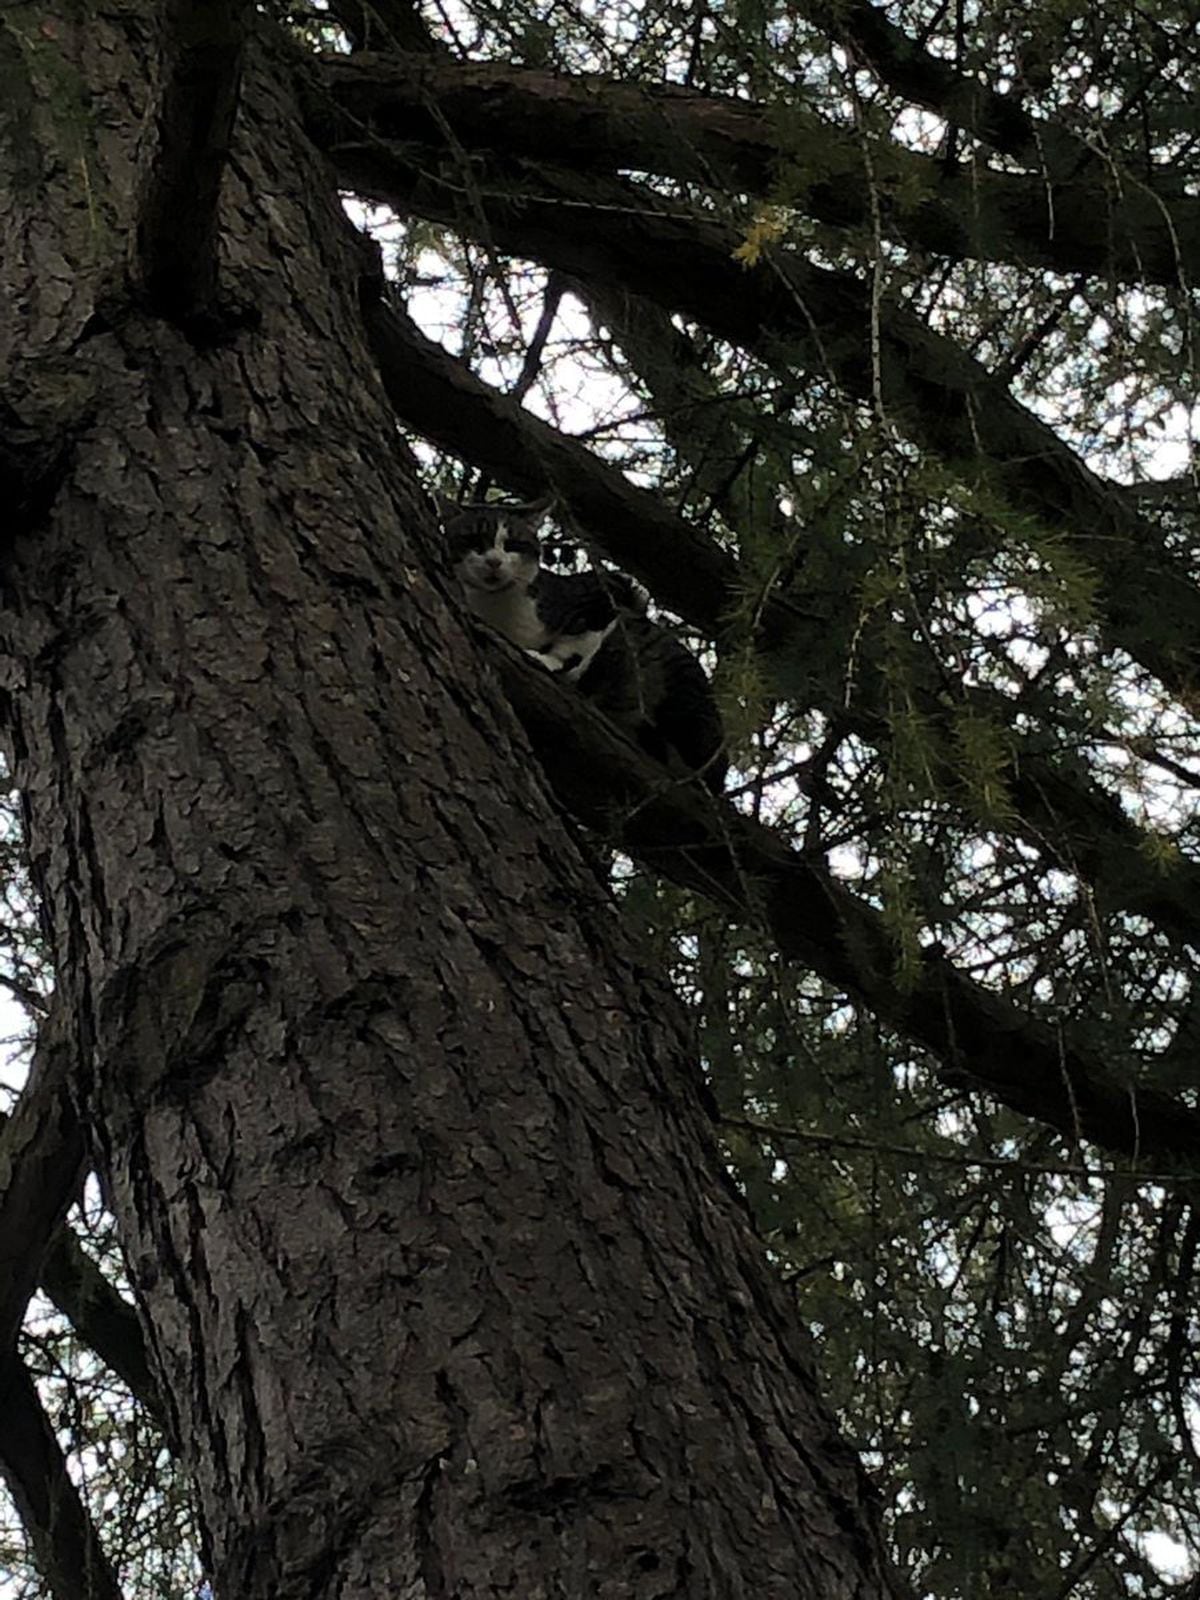 Cat rescued after getting stuck 25 feet up a tree in Much Wenlock